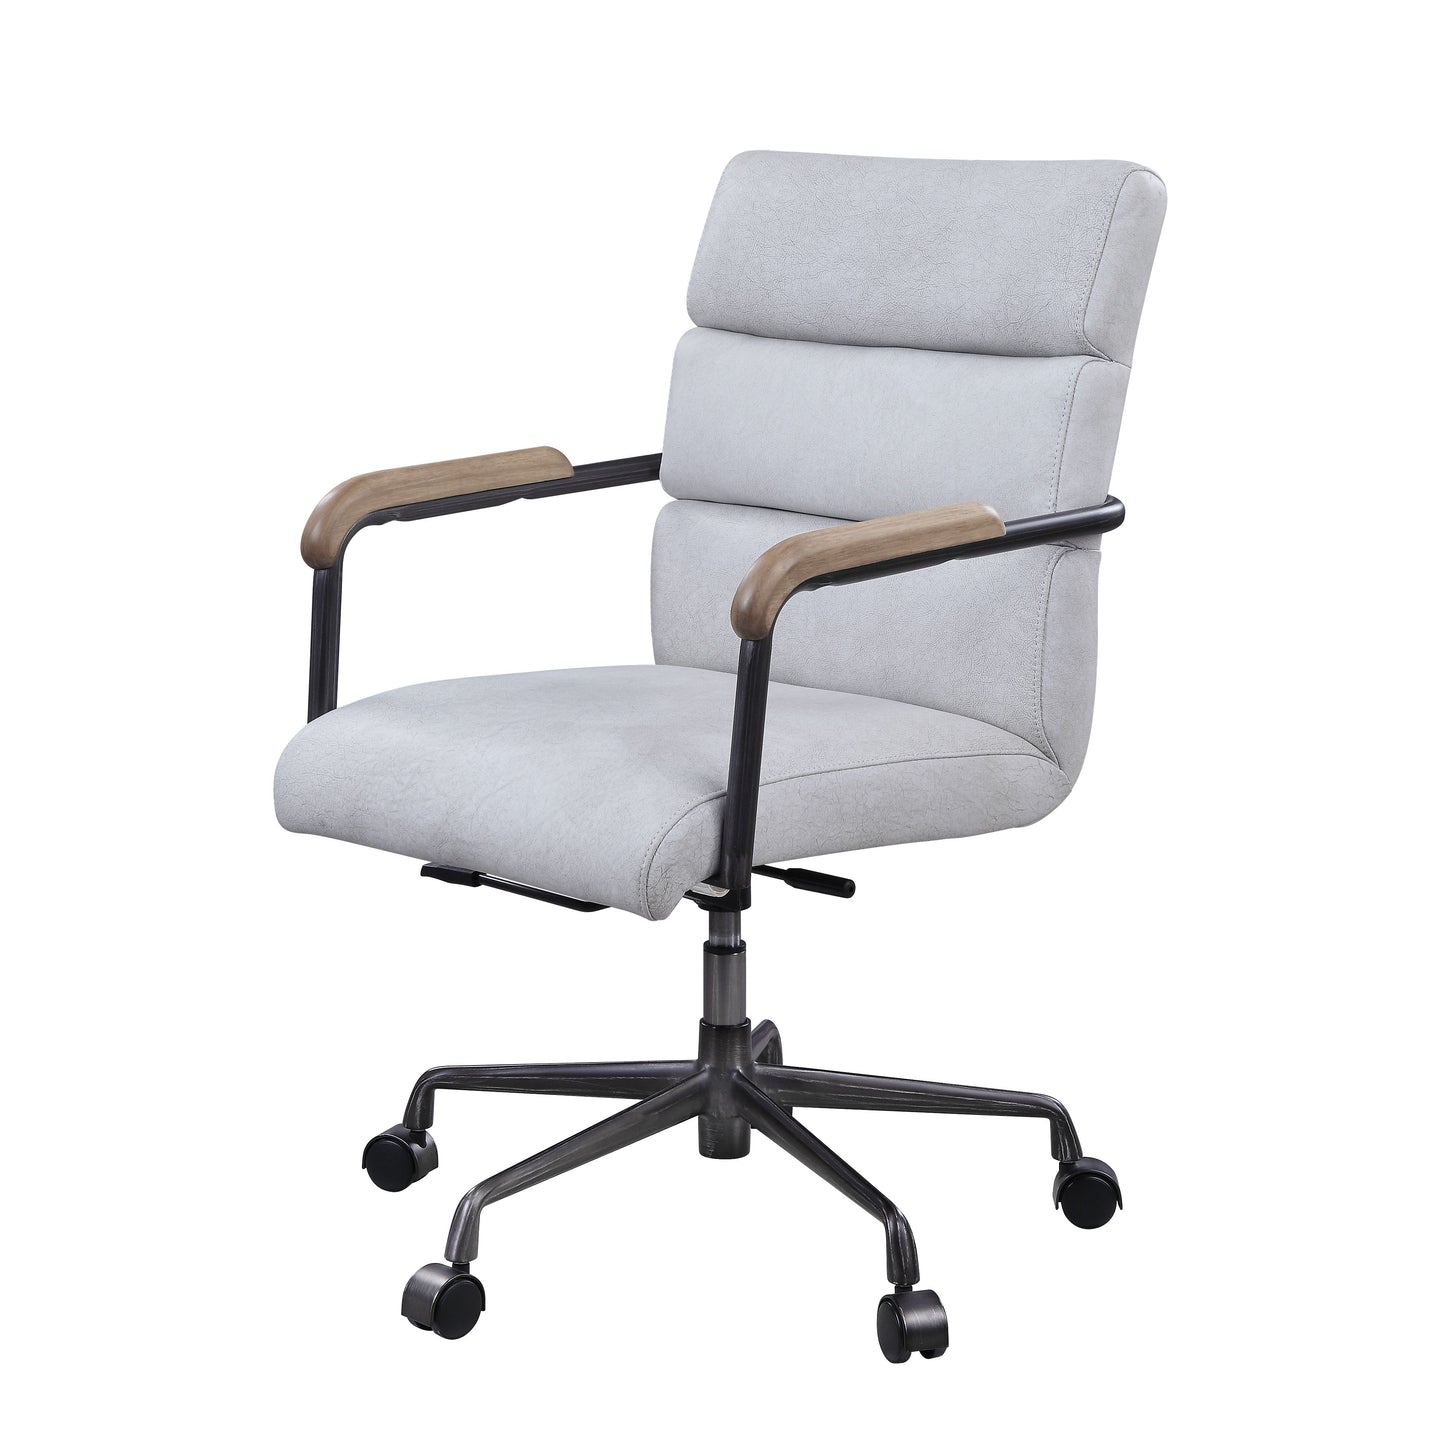 Halcyon Office Chair